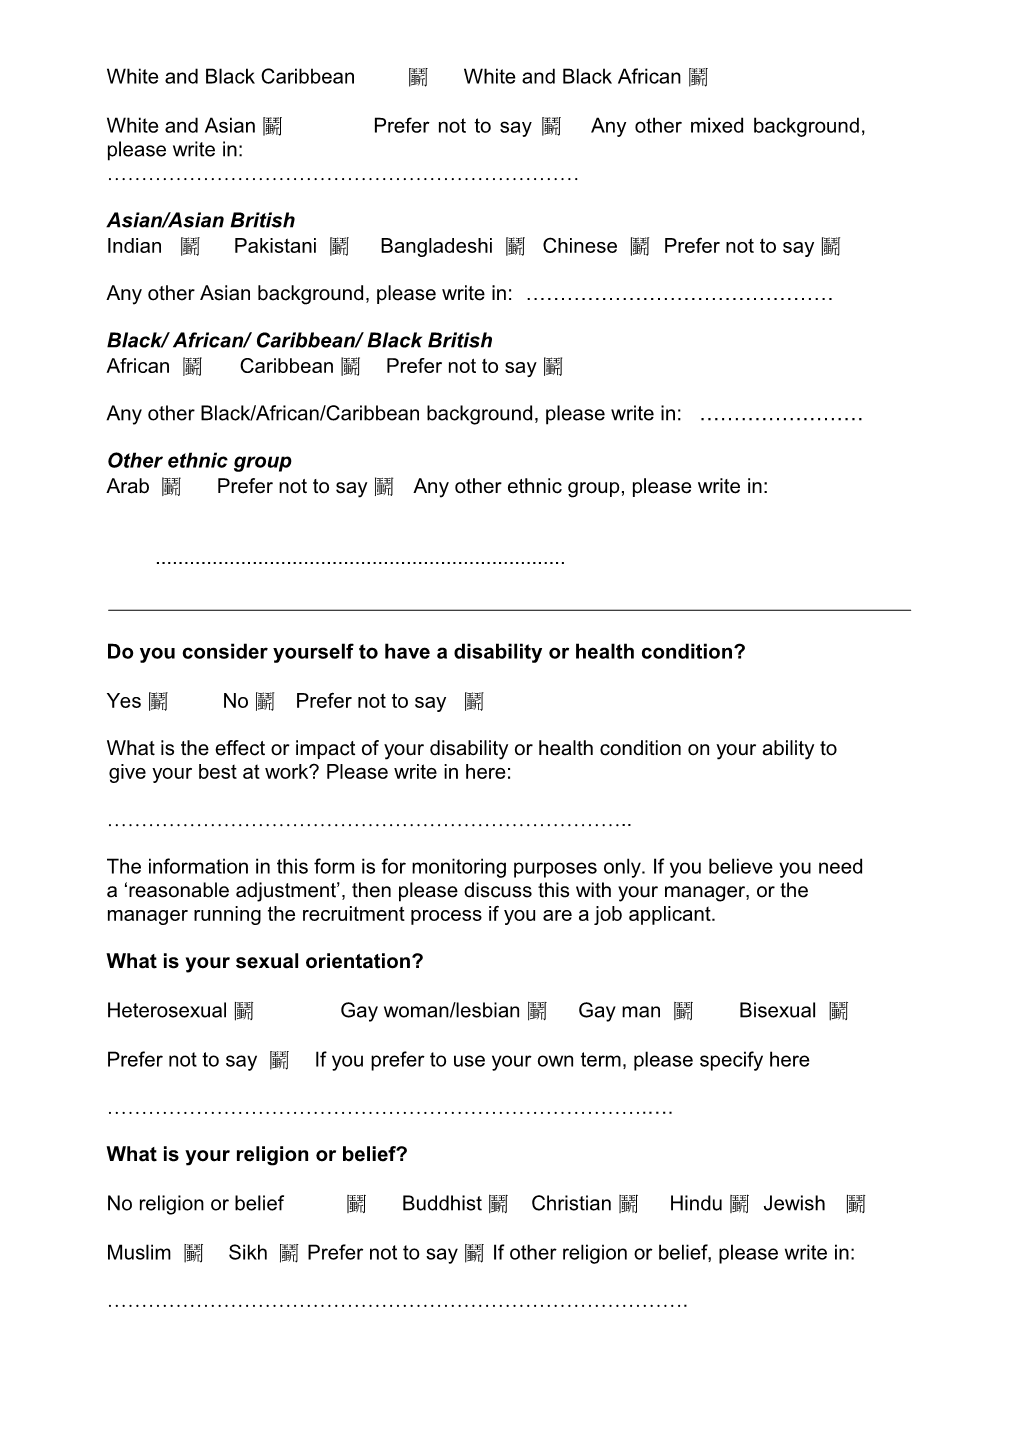 Annex a Sample Equal Opportunities Monitoring Form s4